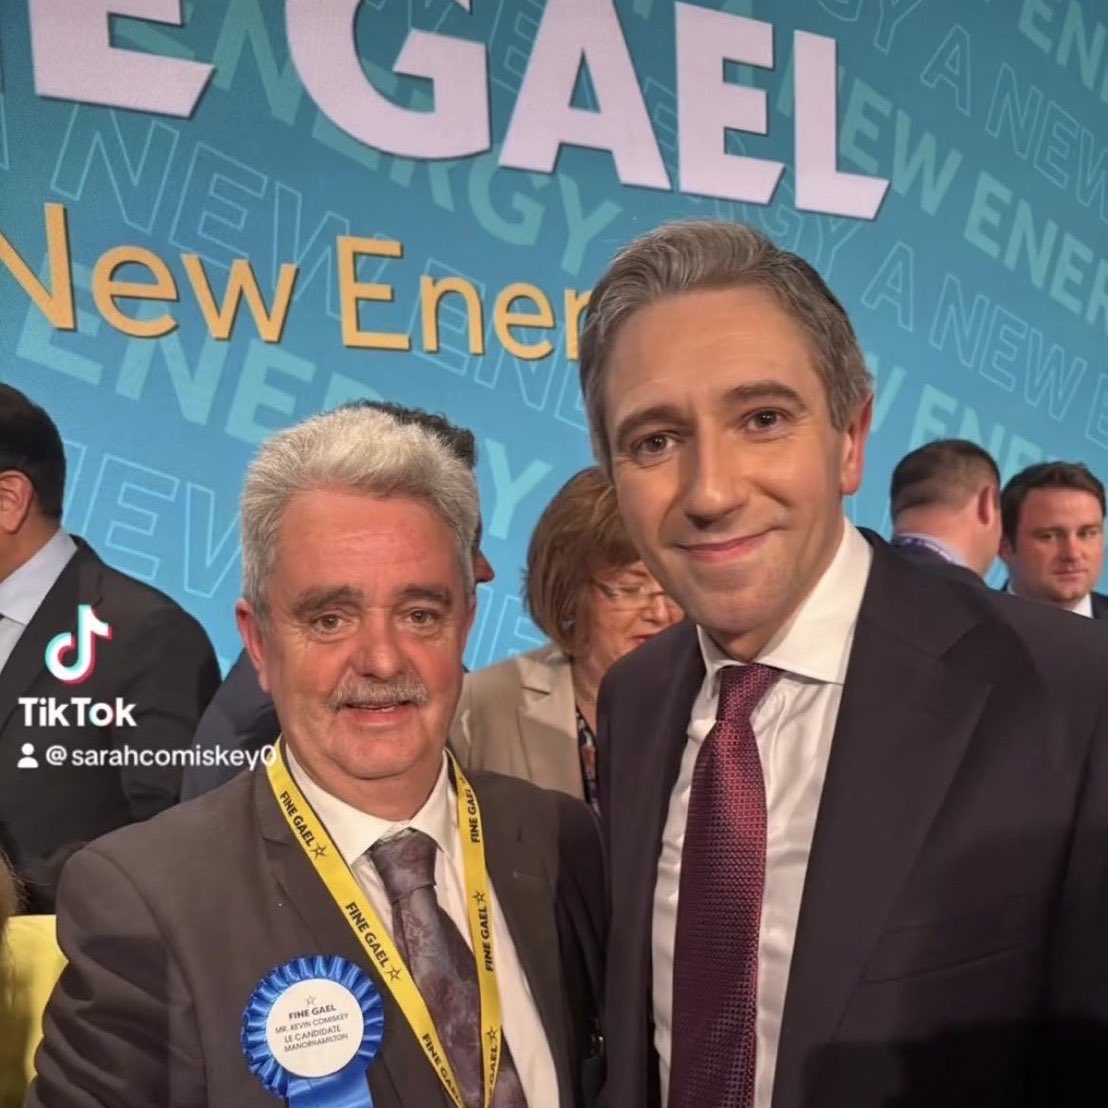 ‘Law and order’ Taoiseach Simon Harris pictured with Fine Gael party candidate Kevin Comiskey who has 15 criminal convictions including ones for drunk driving, not submitting a tax return and illegally using green diesel.